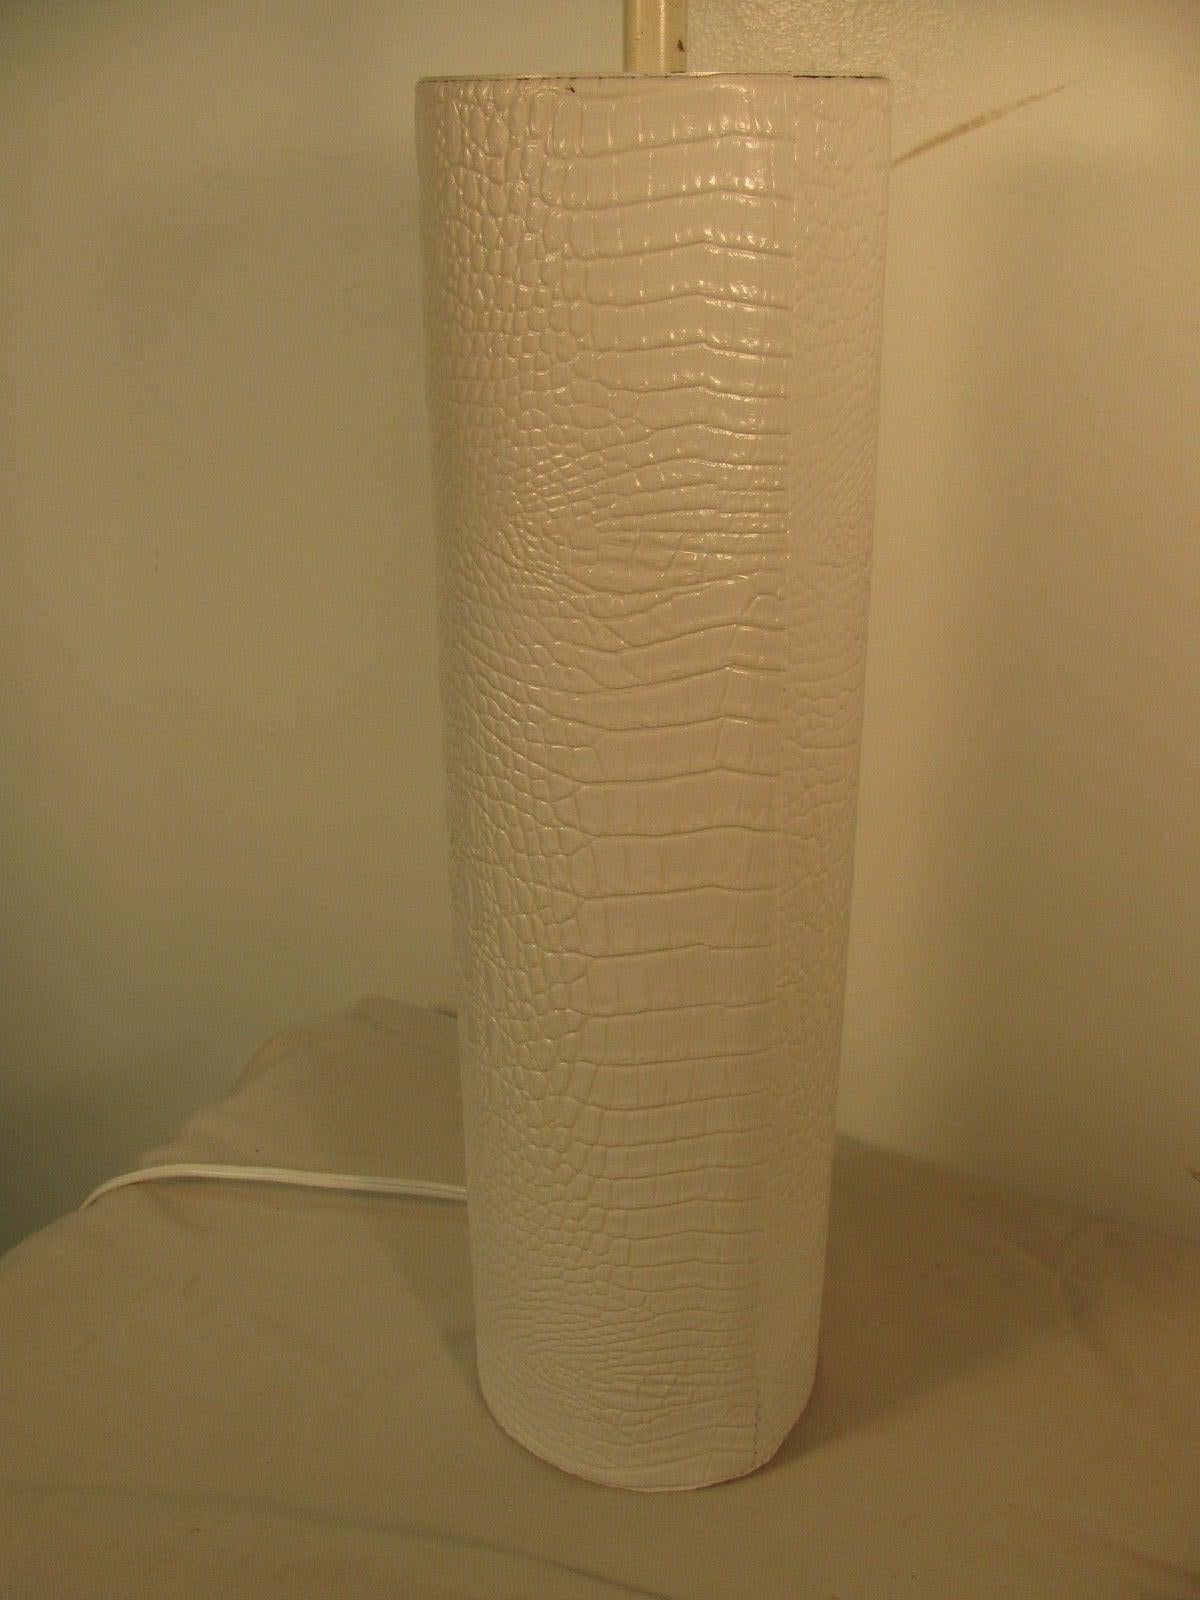 Elegant and simple pair of table lamps in faux white crocodile. 22 in. to top of the socket. Steel bases for good weight to support lamp & shade. Sound wiring. In excellent vintage condition with minimal wear.